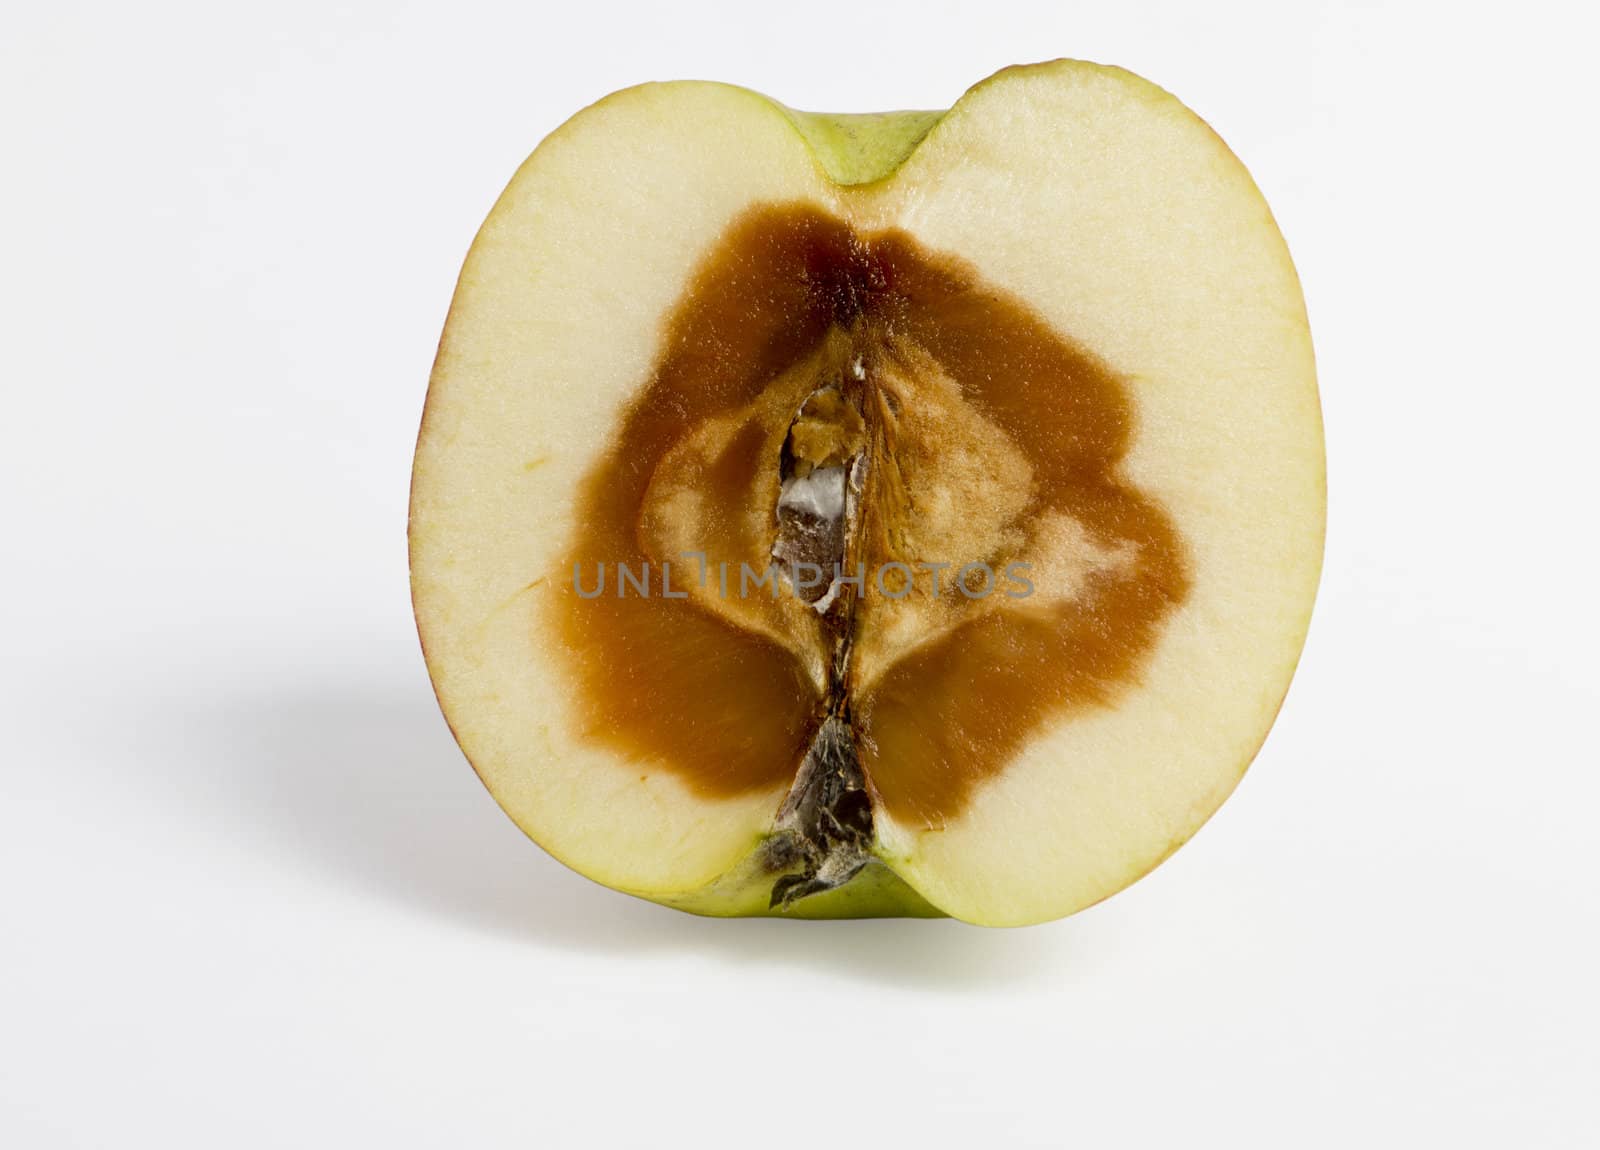 feculent apple - rotten from the center - grey background - with clipping path